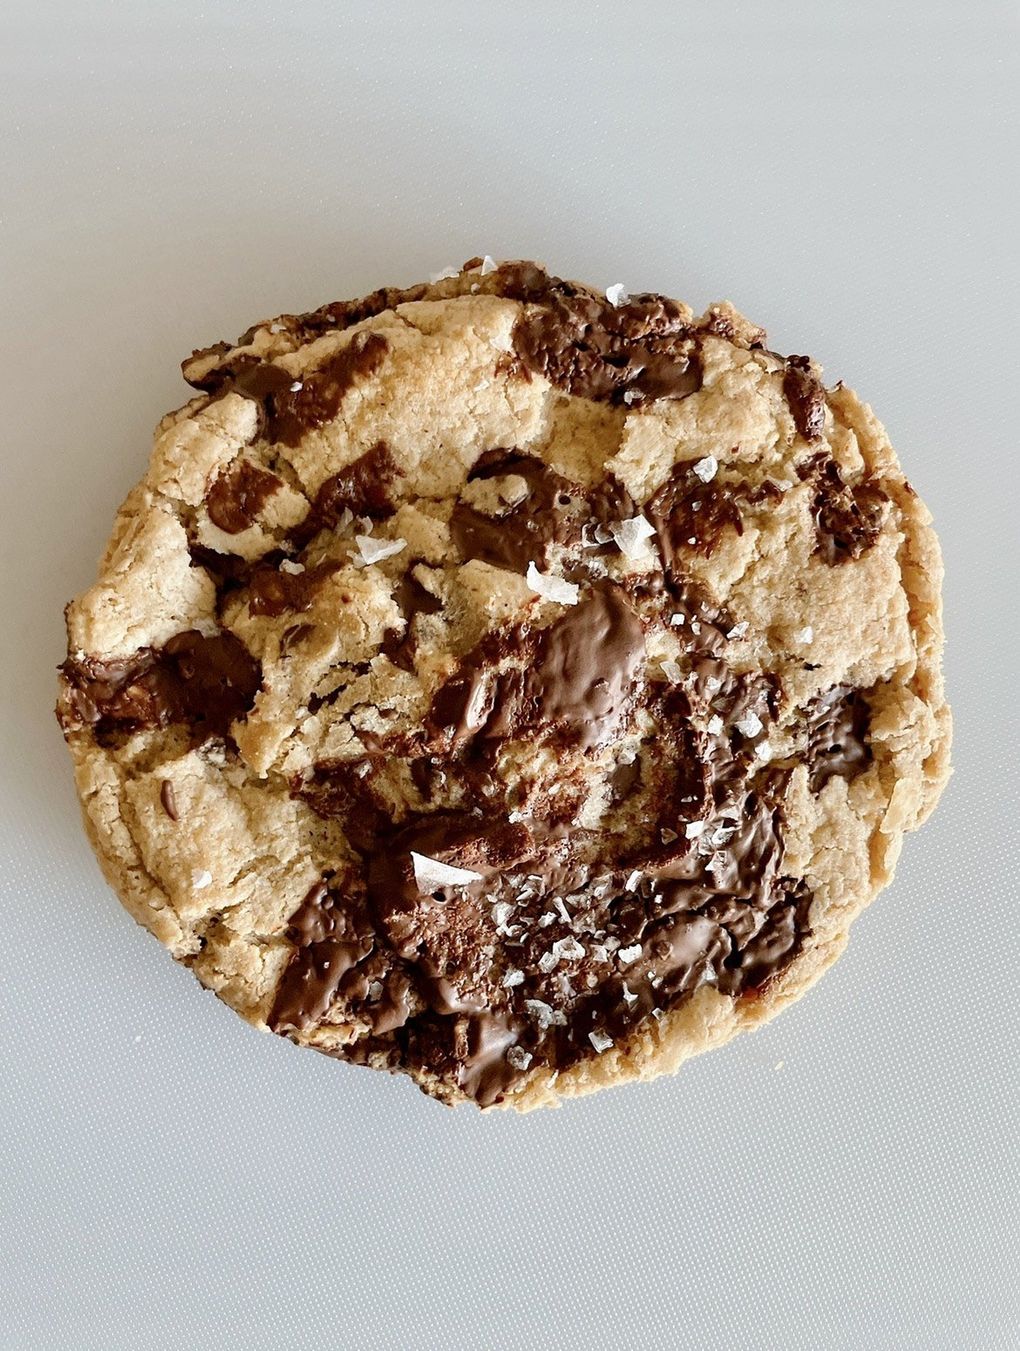 Sara Eveland of the My Friend’s Cookies pop-up makes large, chewy iterations of cookie flavor classics from chocolate chip and snickerdoodle to peanut butter and sugar. (Courtesy of Sara Eveland)